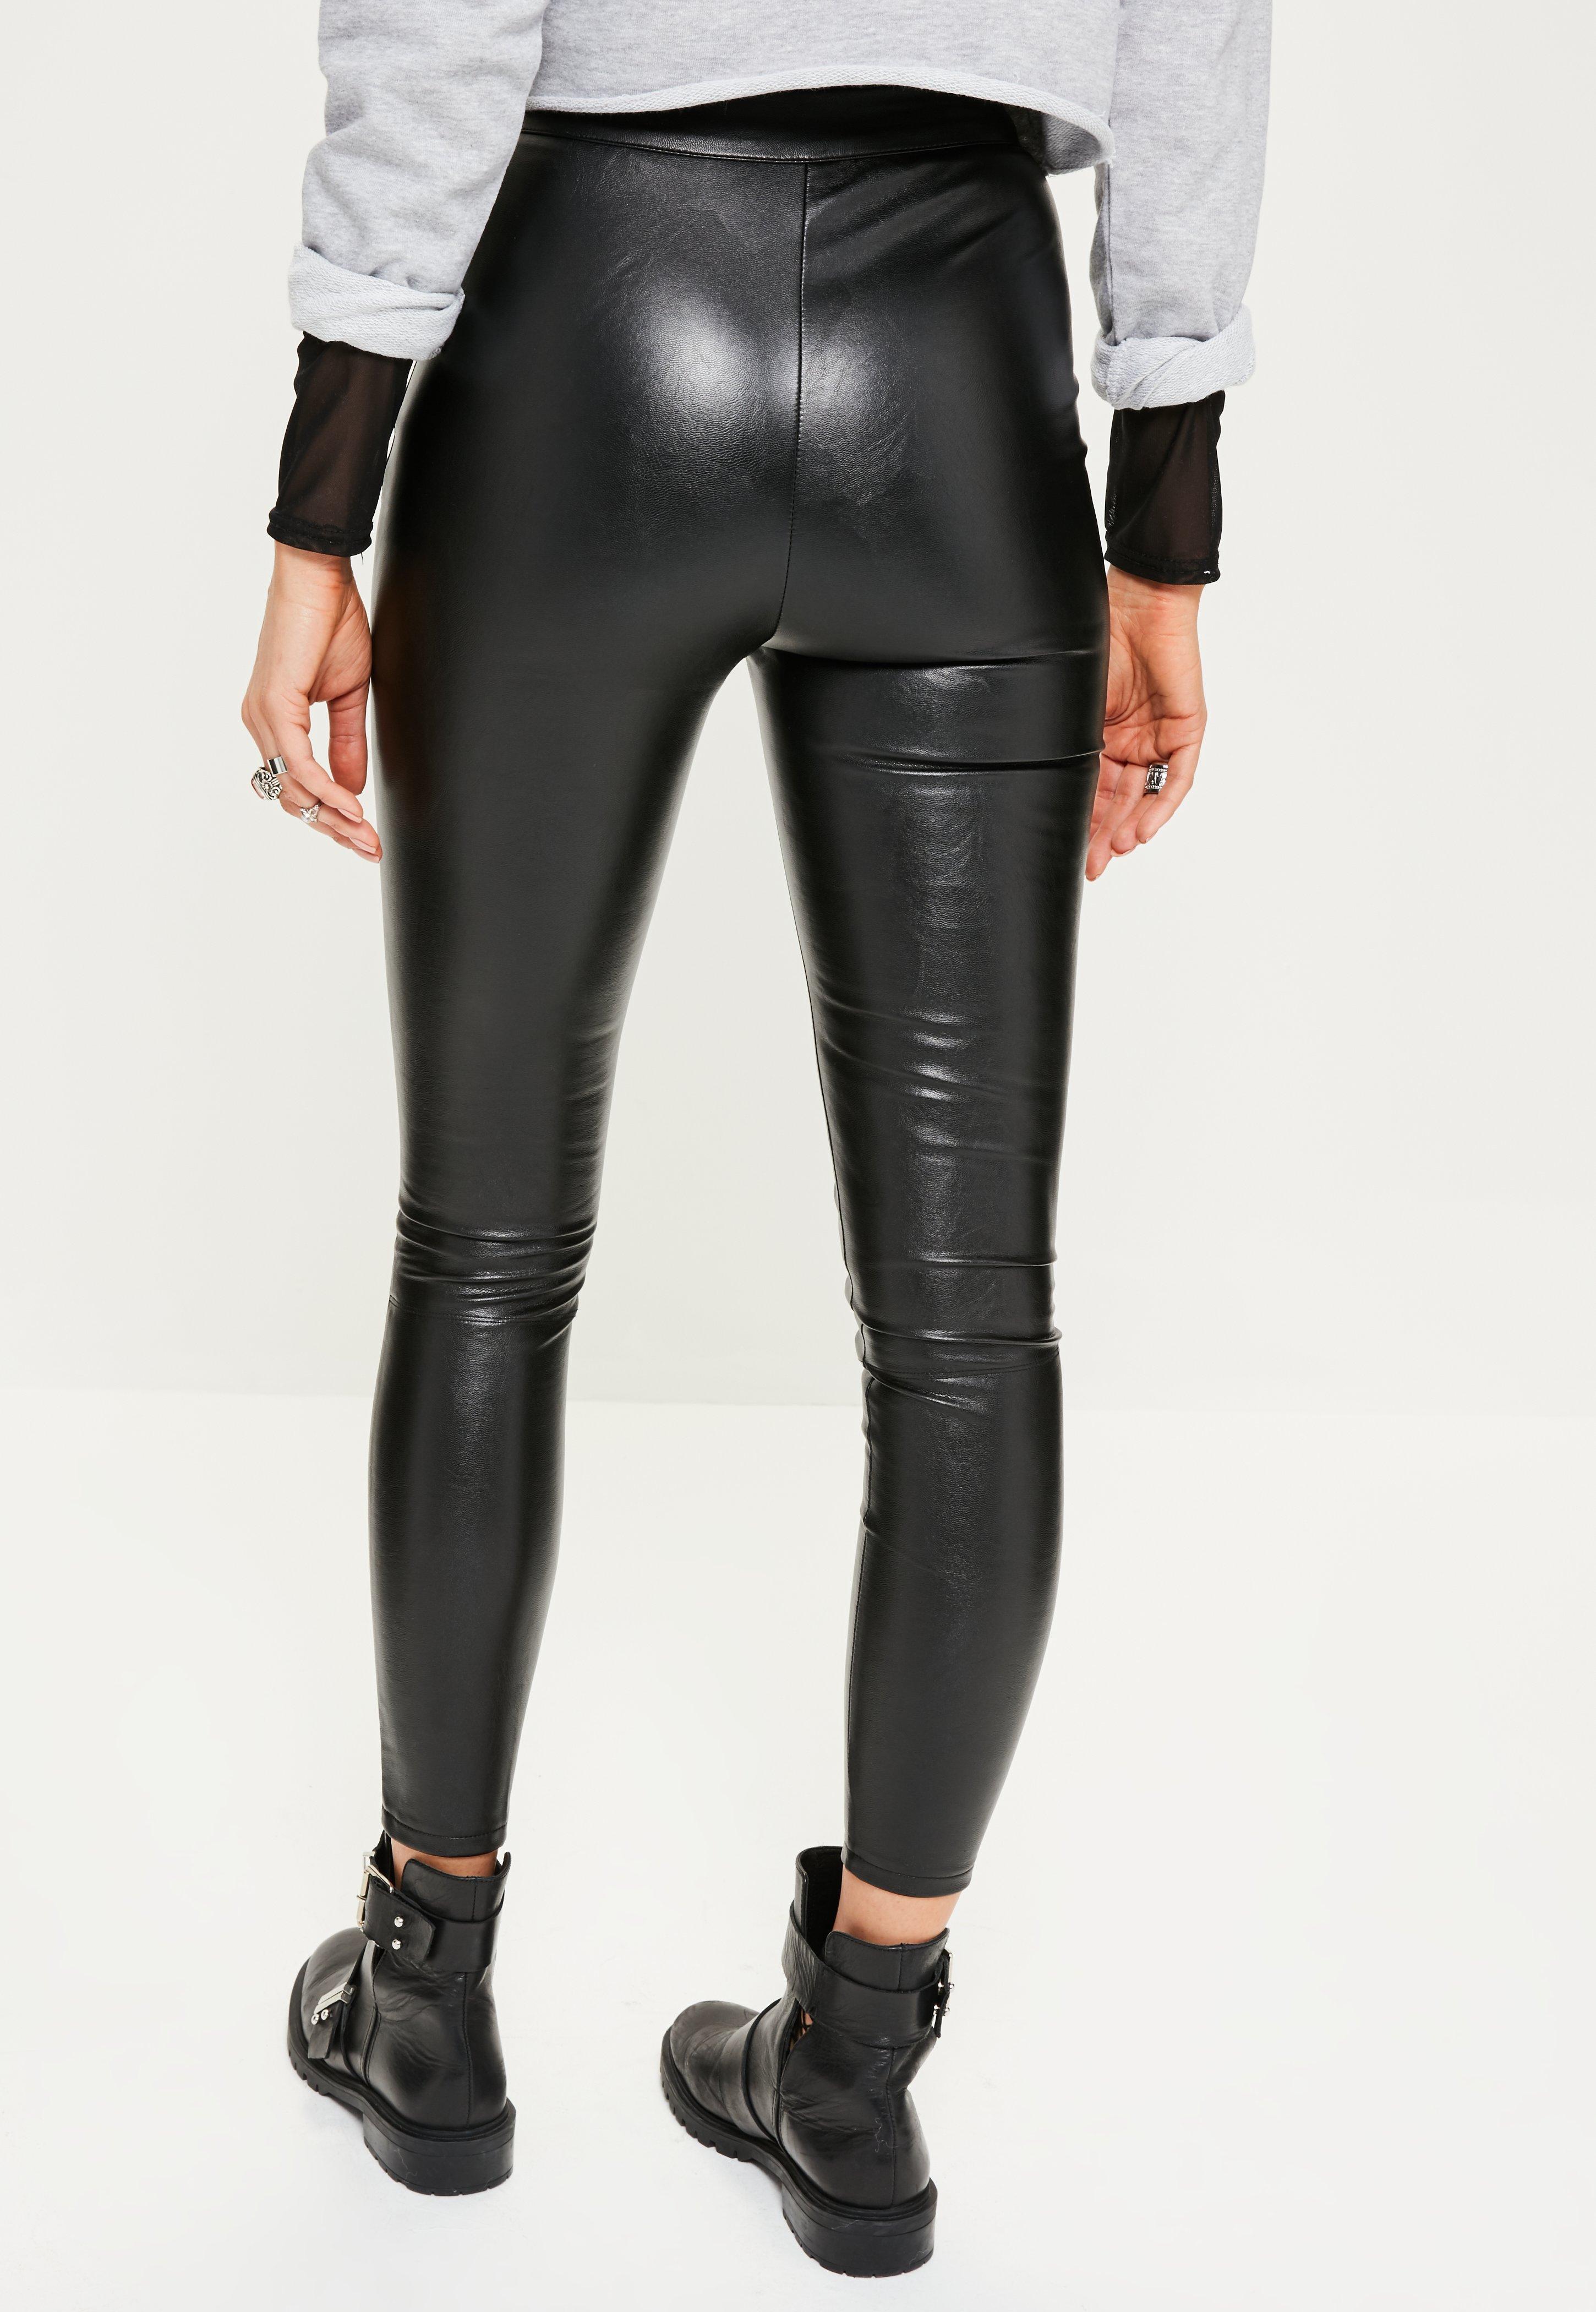 Missguided Faux Leather Lace Up Side Leggings Black  Lace up trousers,  Leather dresses, Lace up leggings